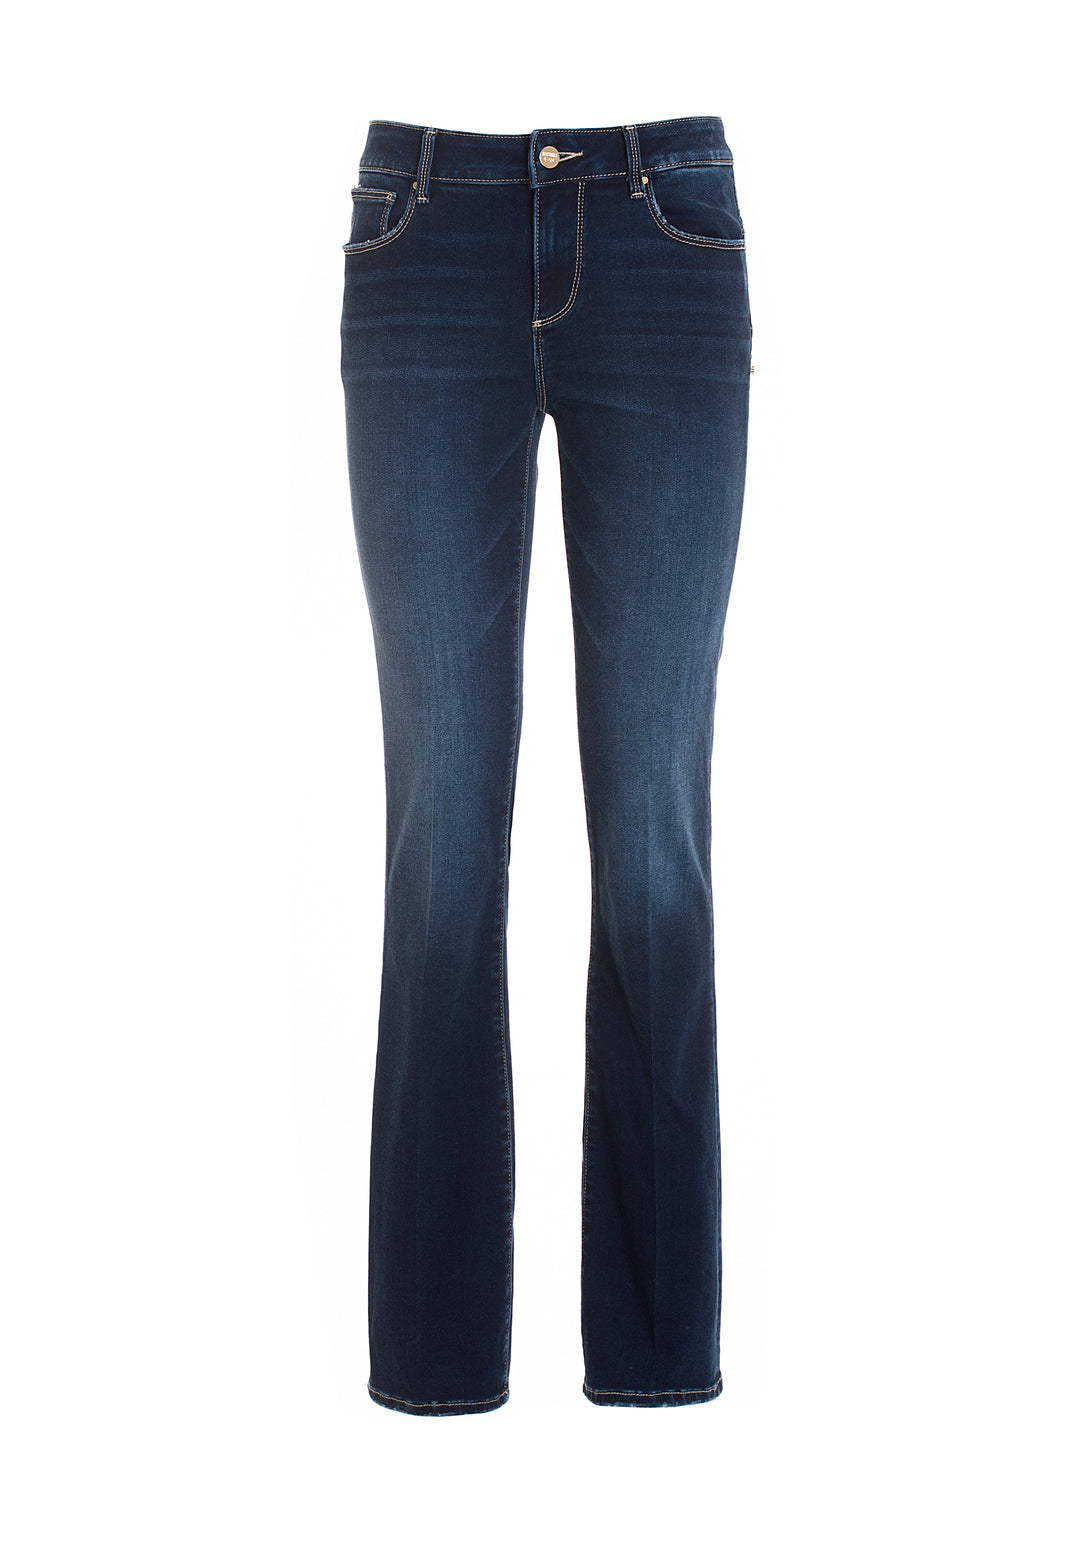 Jeans bootcut with shape-up effect made in denim with middle wash